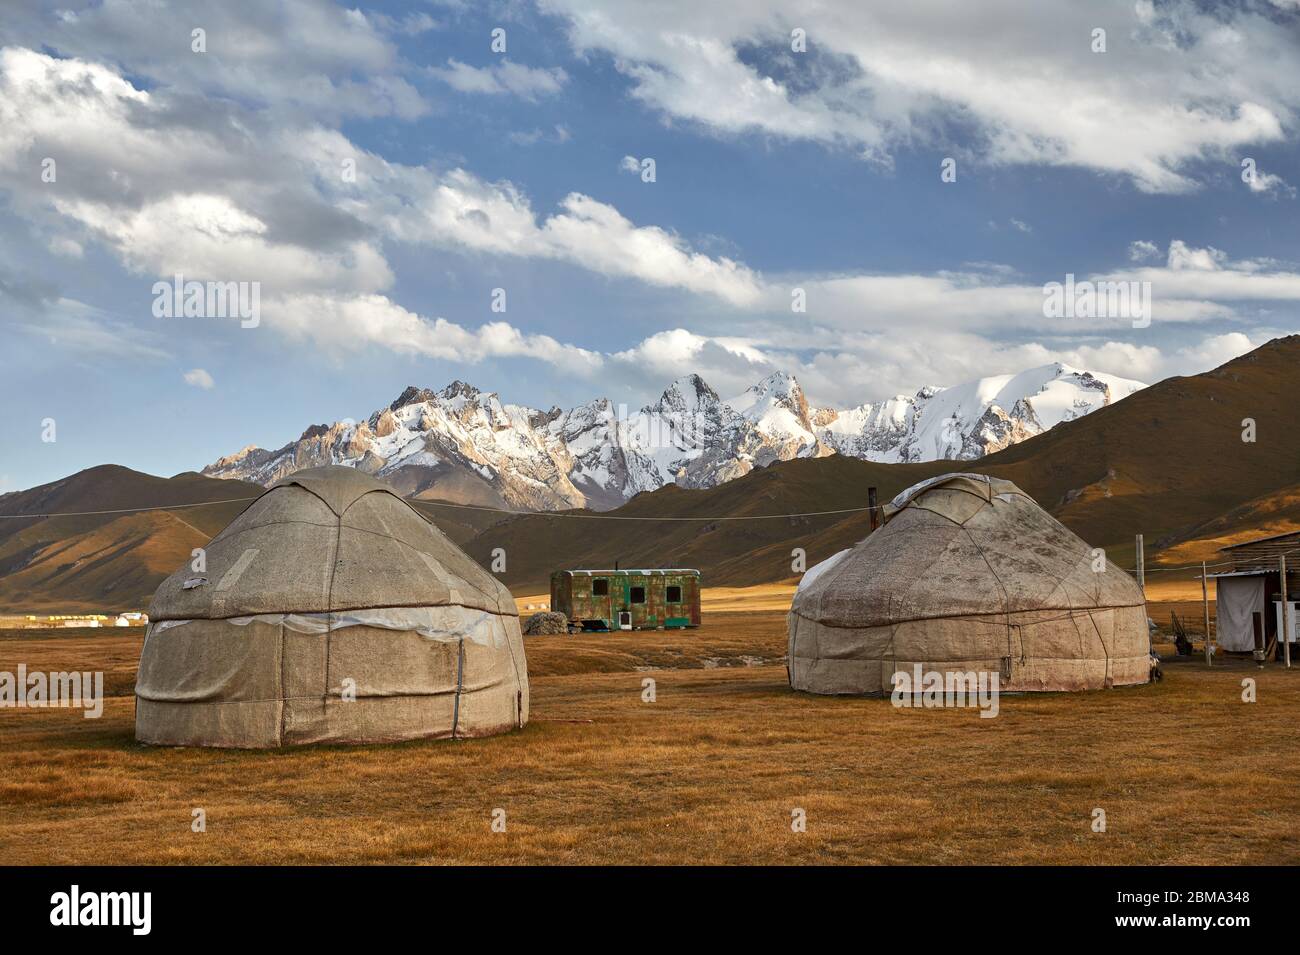 Yurt nomadic houses camp at mountain valley in Central Asia Stock Photo